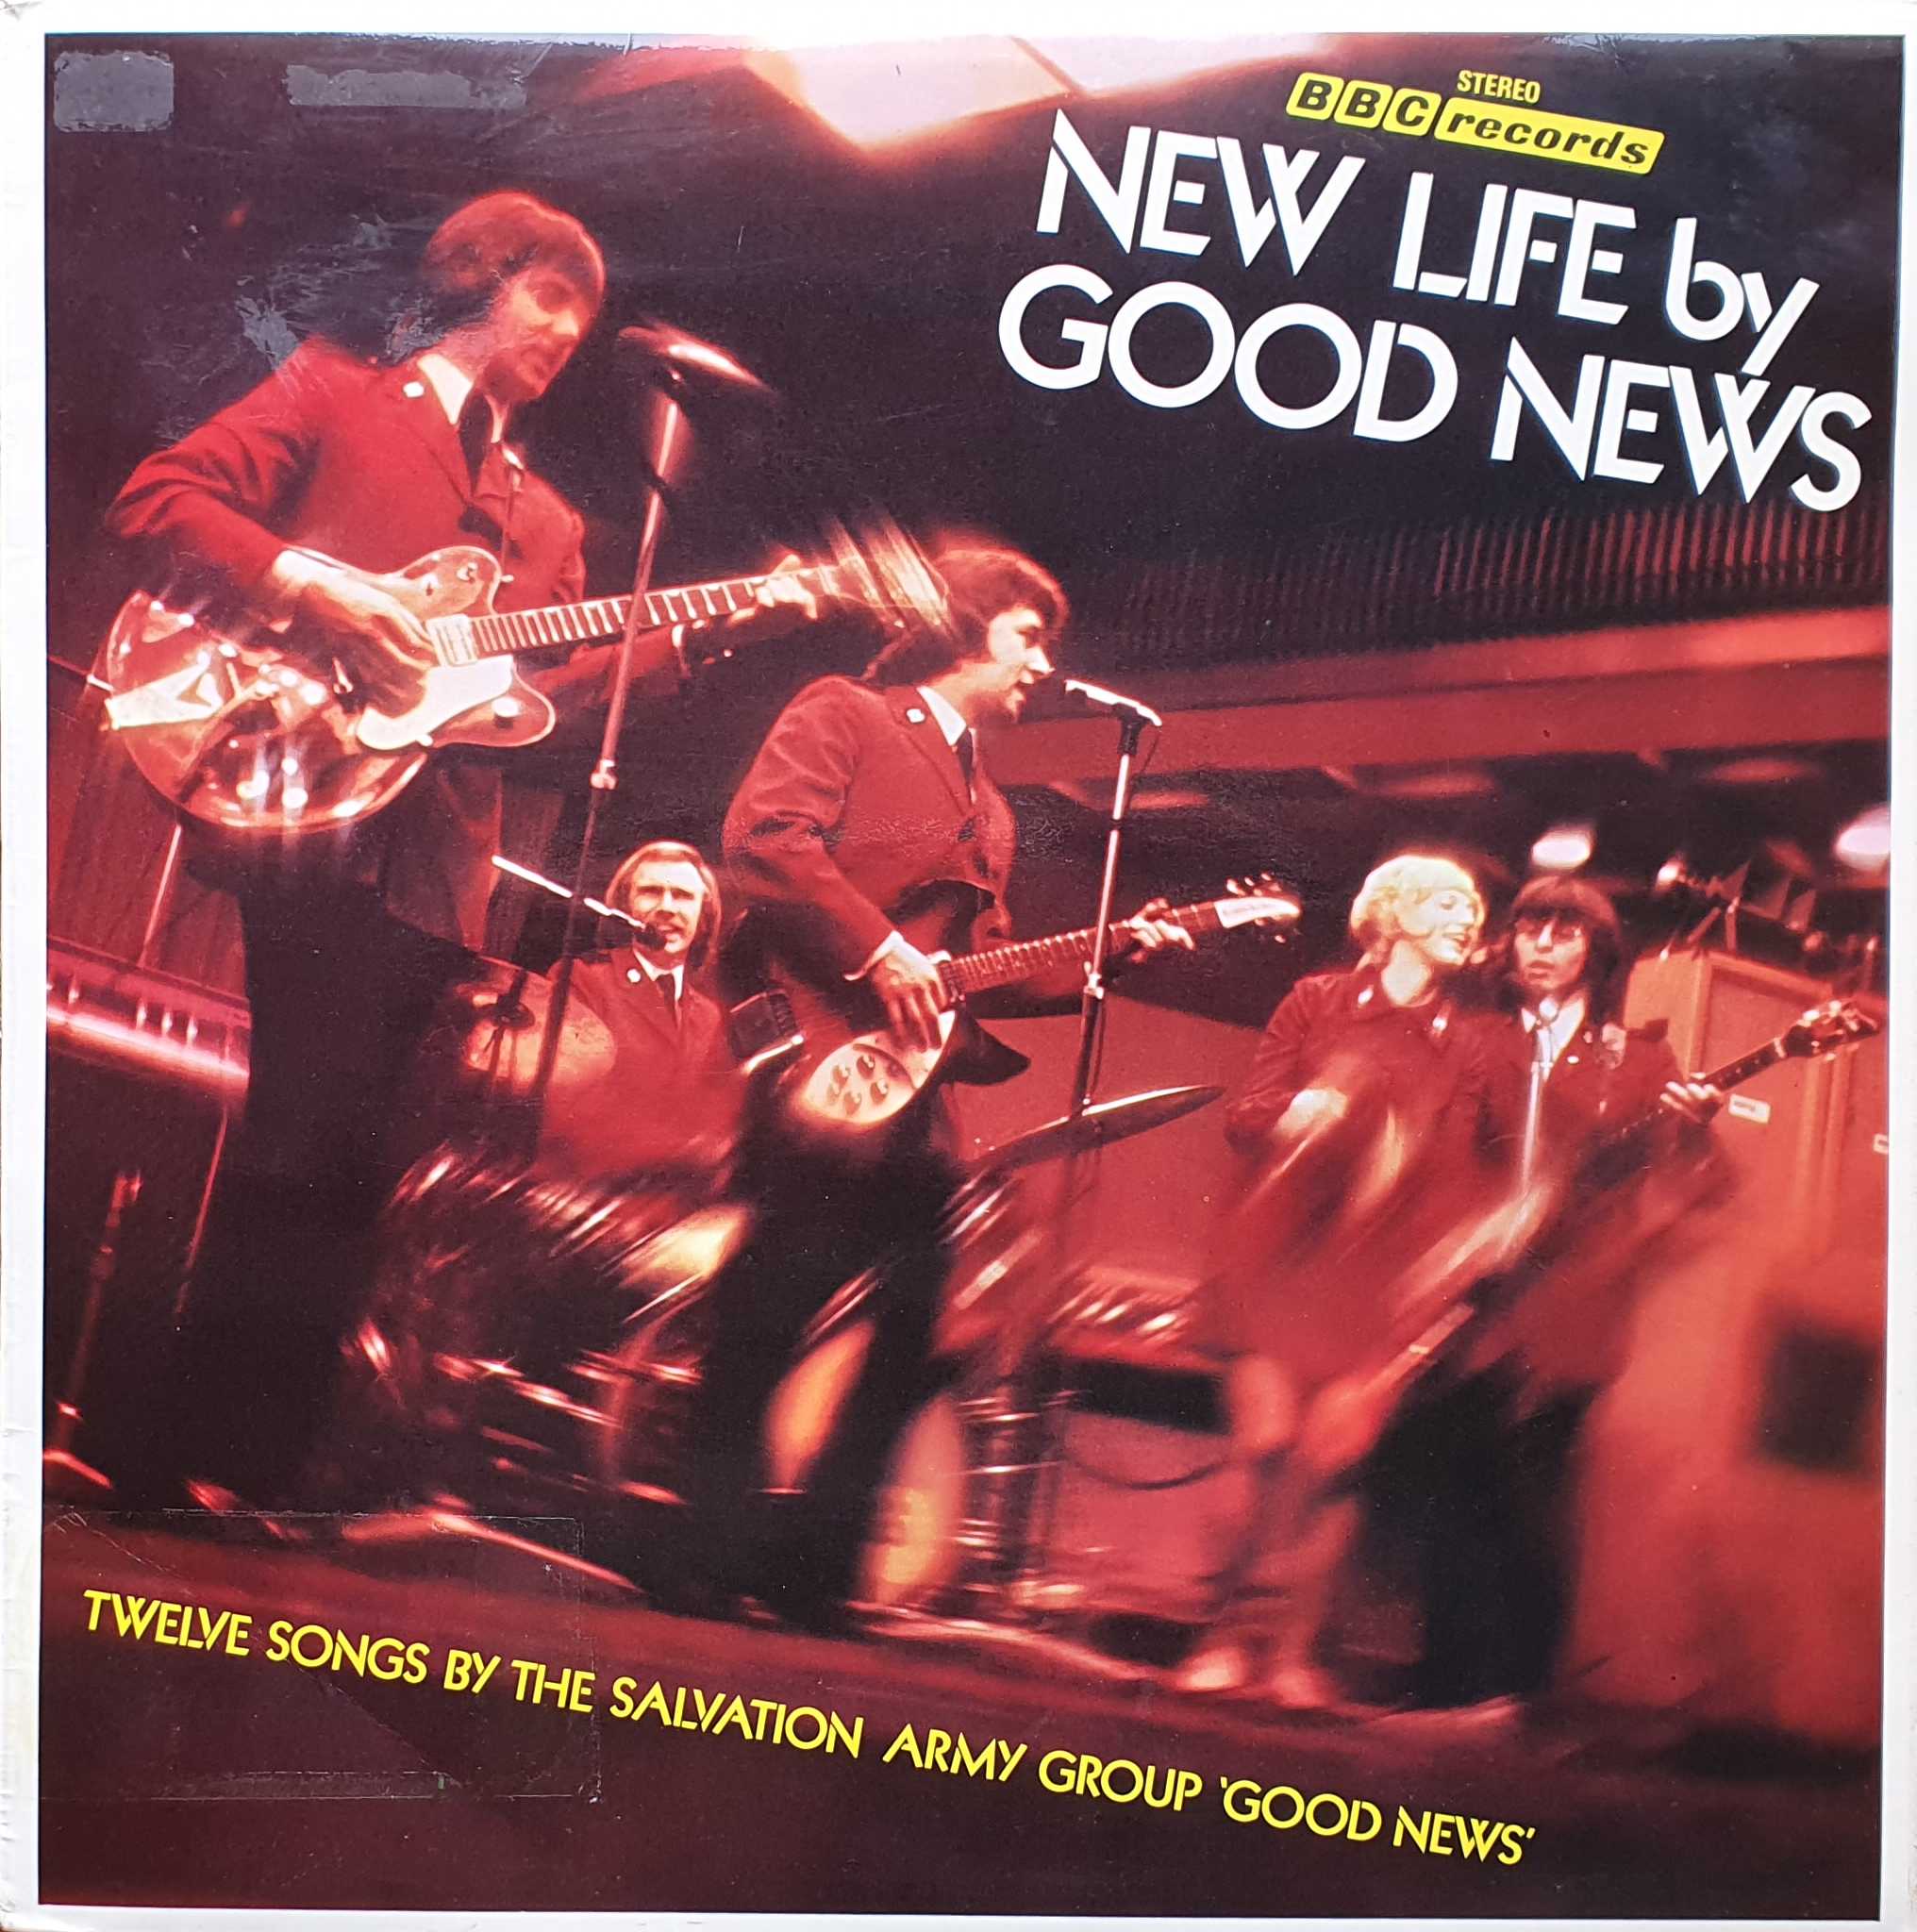 Picture of RESR 29 New life by Good News by artist Bill Davidson / Good News from the BBC albums - Records and Tapes library